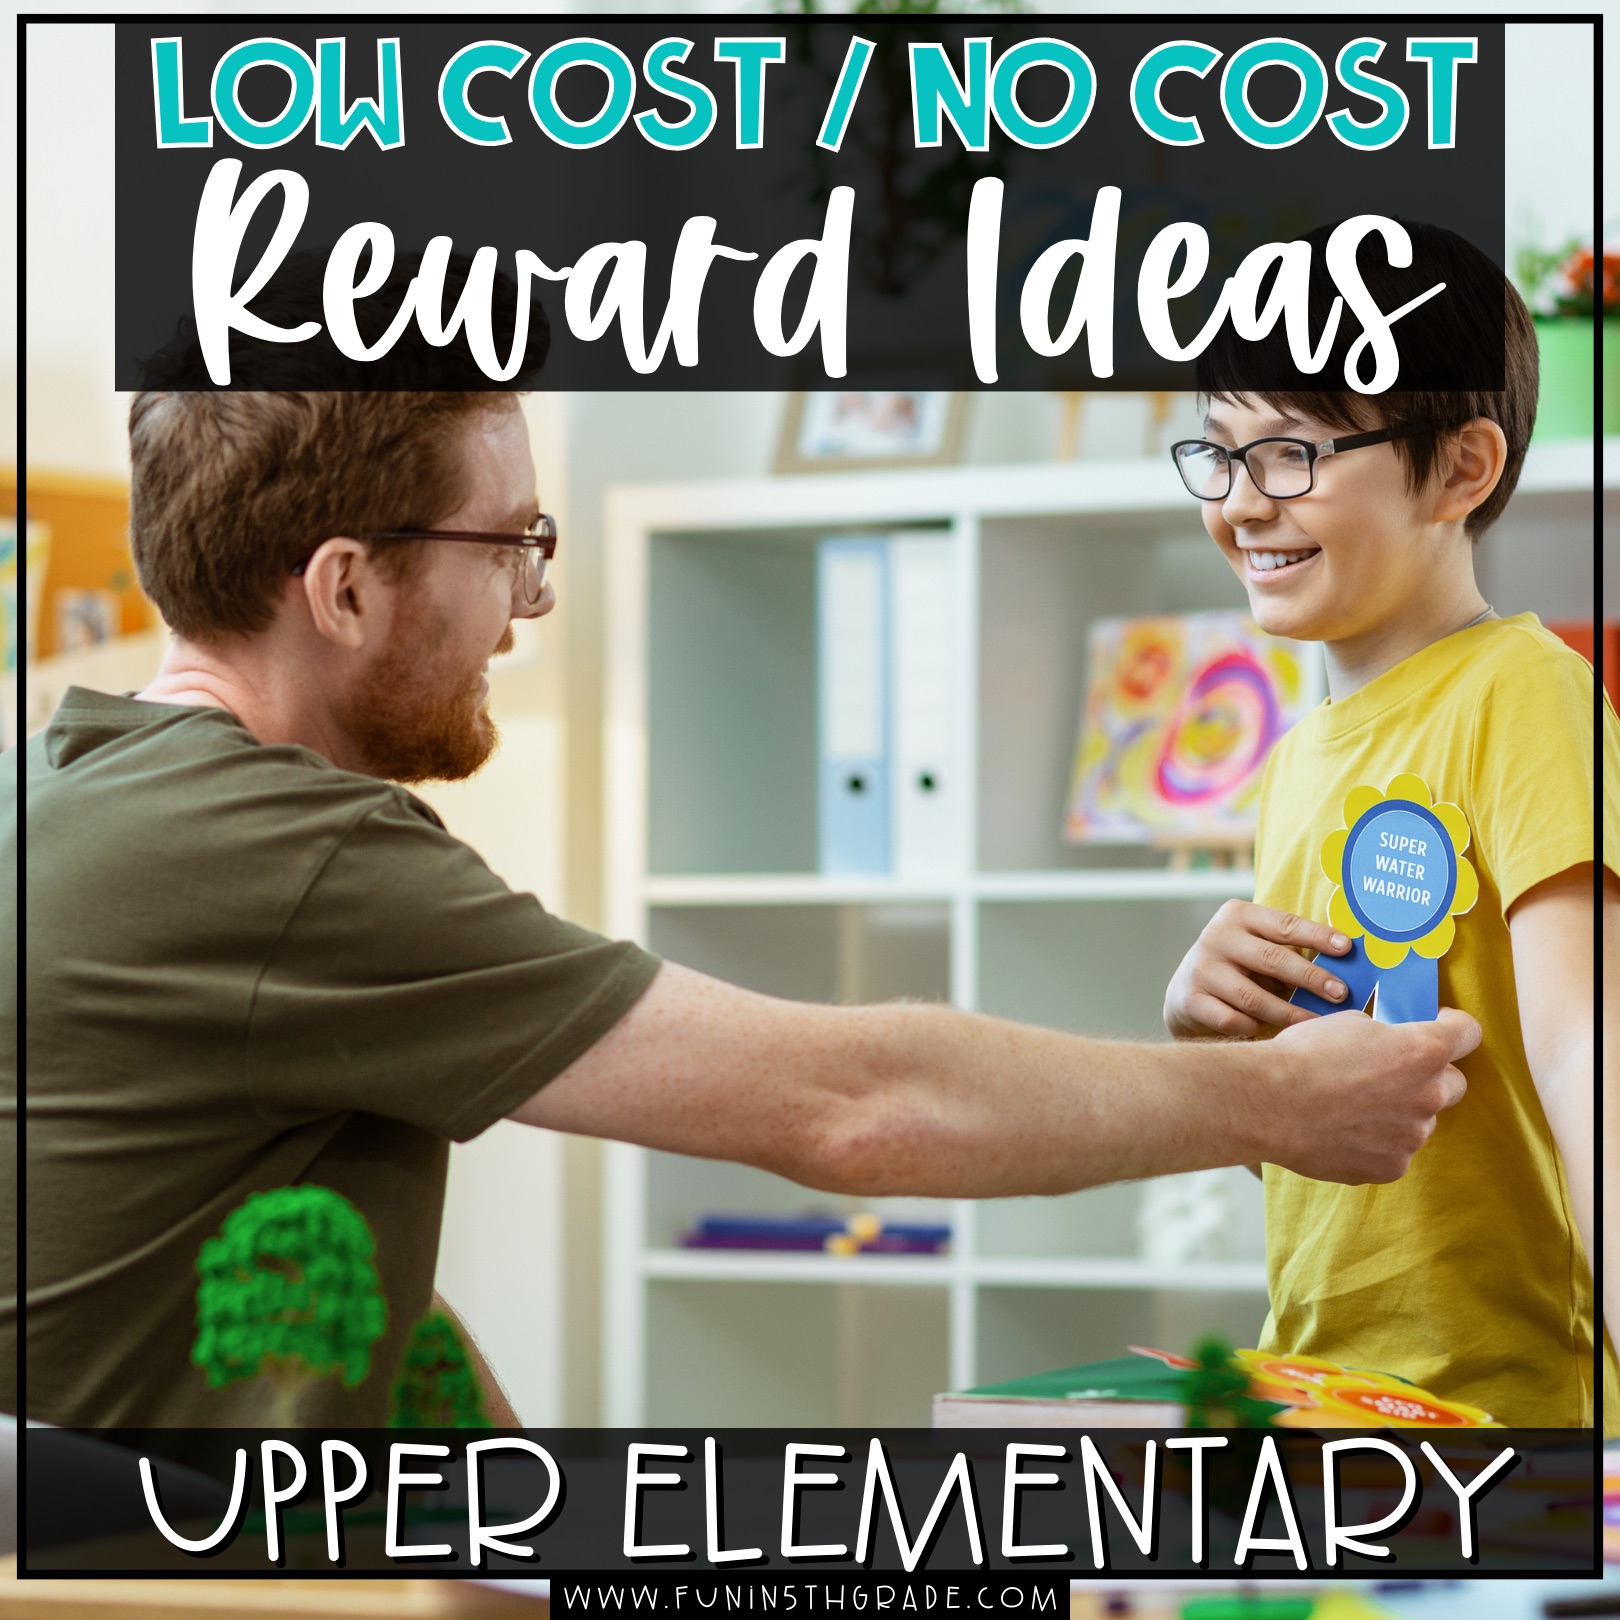 10 low cost/no cost reward ideas for upper elementary students